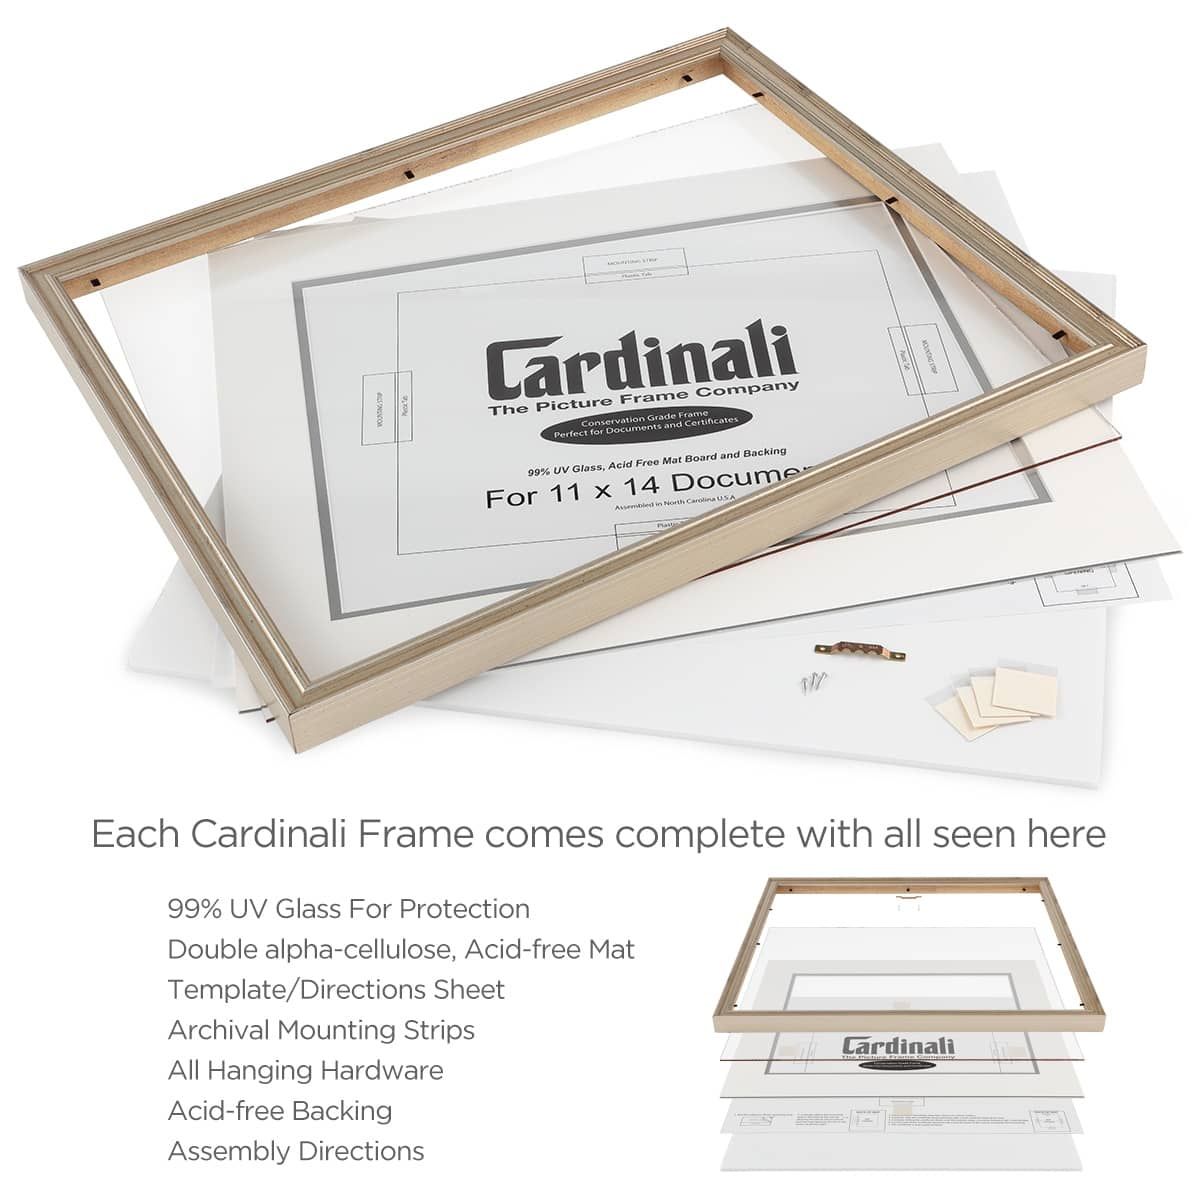 Complete Archival Framing Solution - Includes all Hanging Hardware